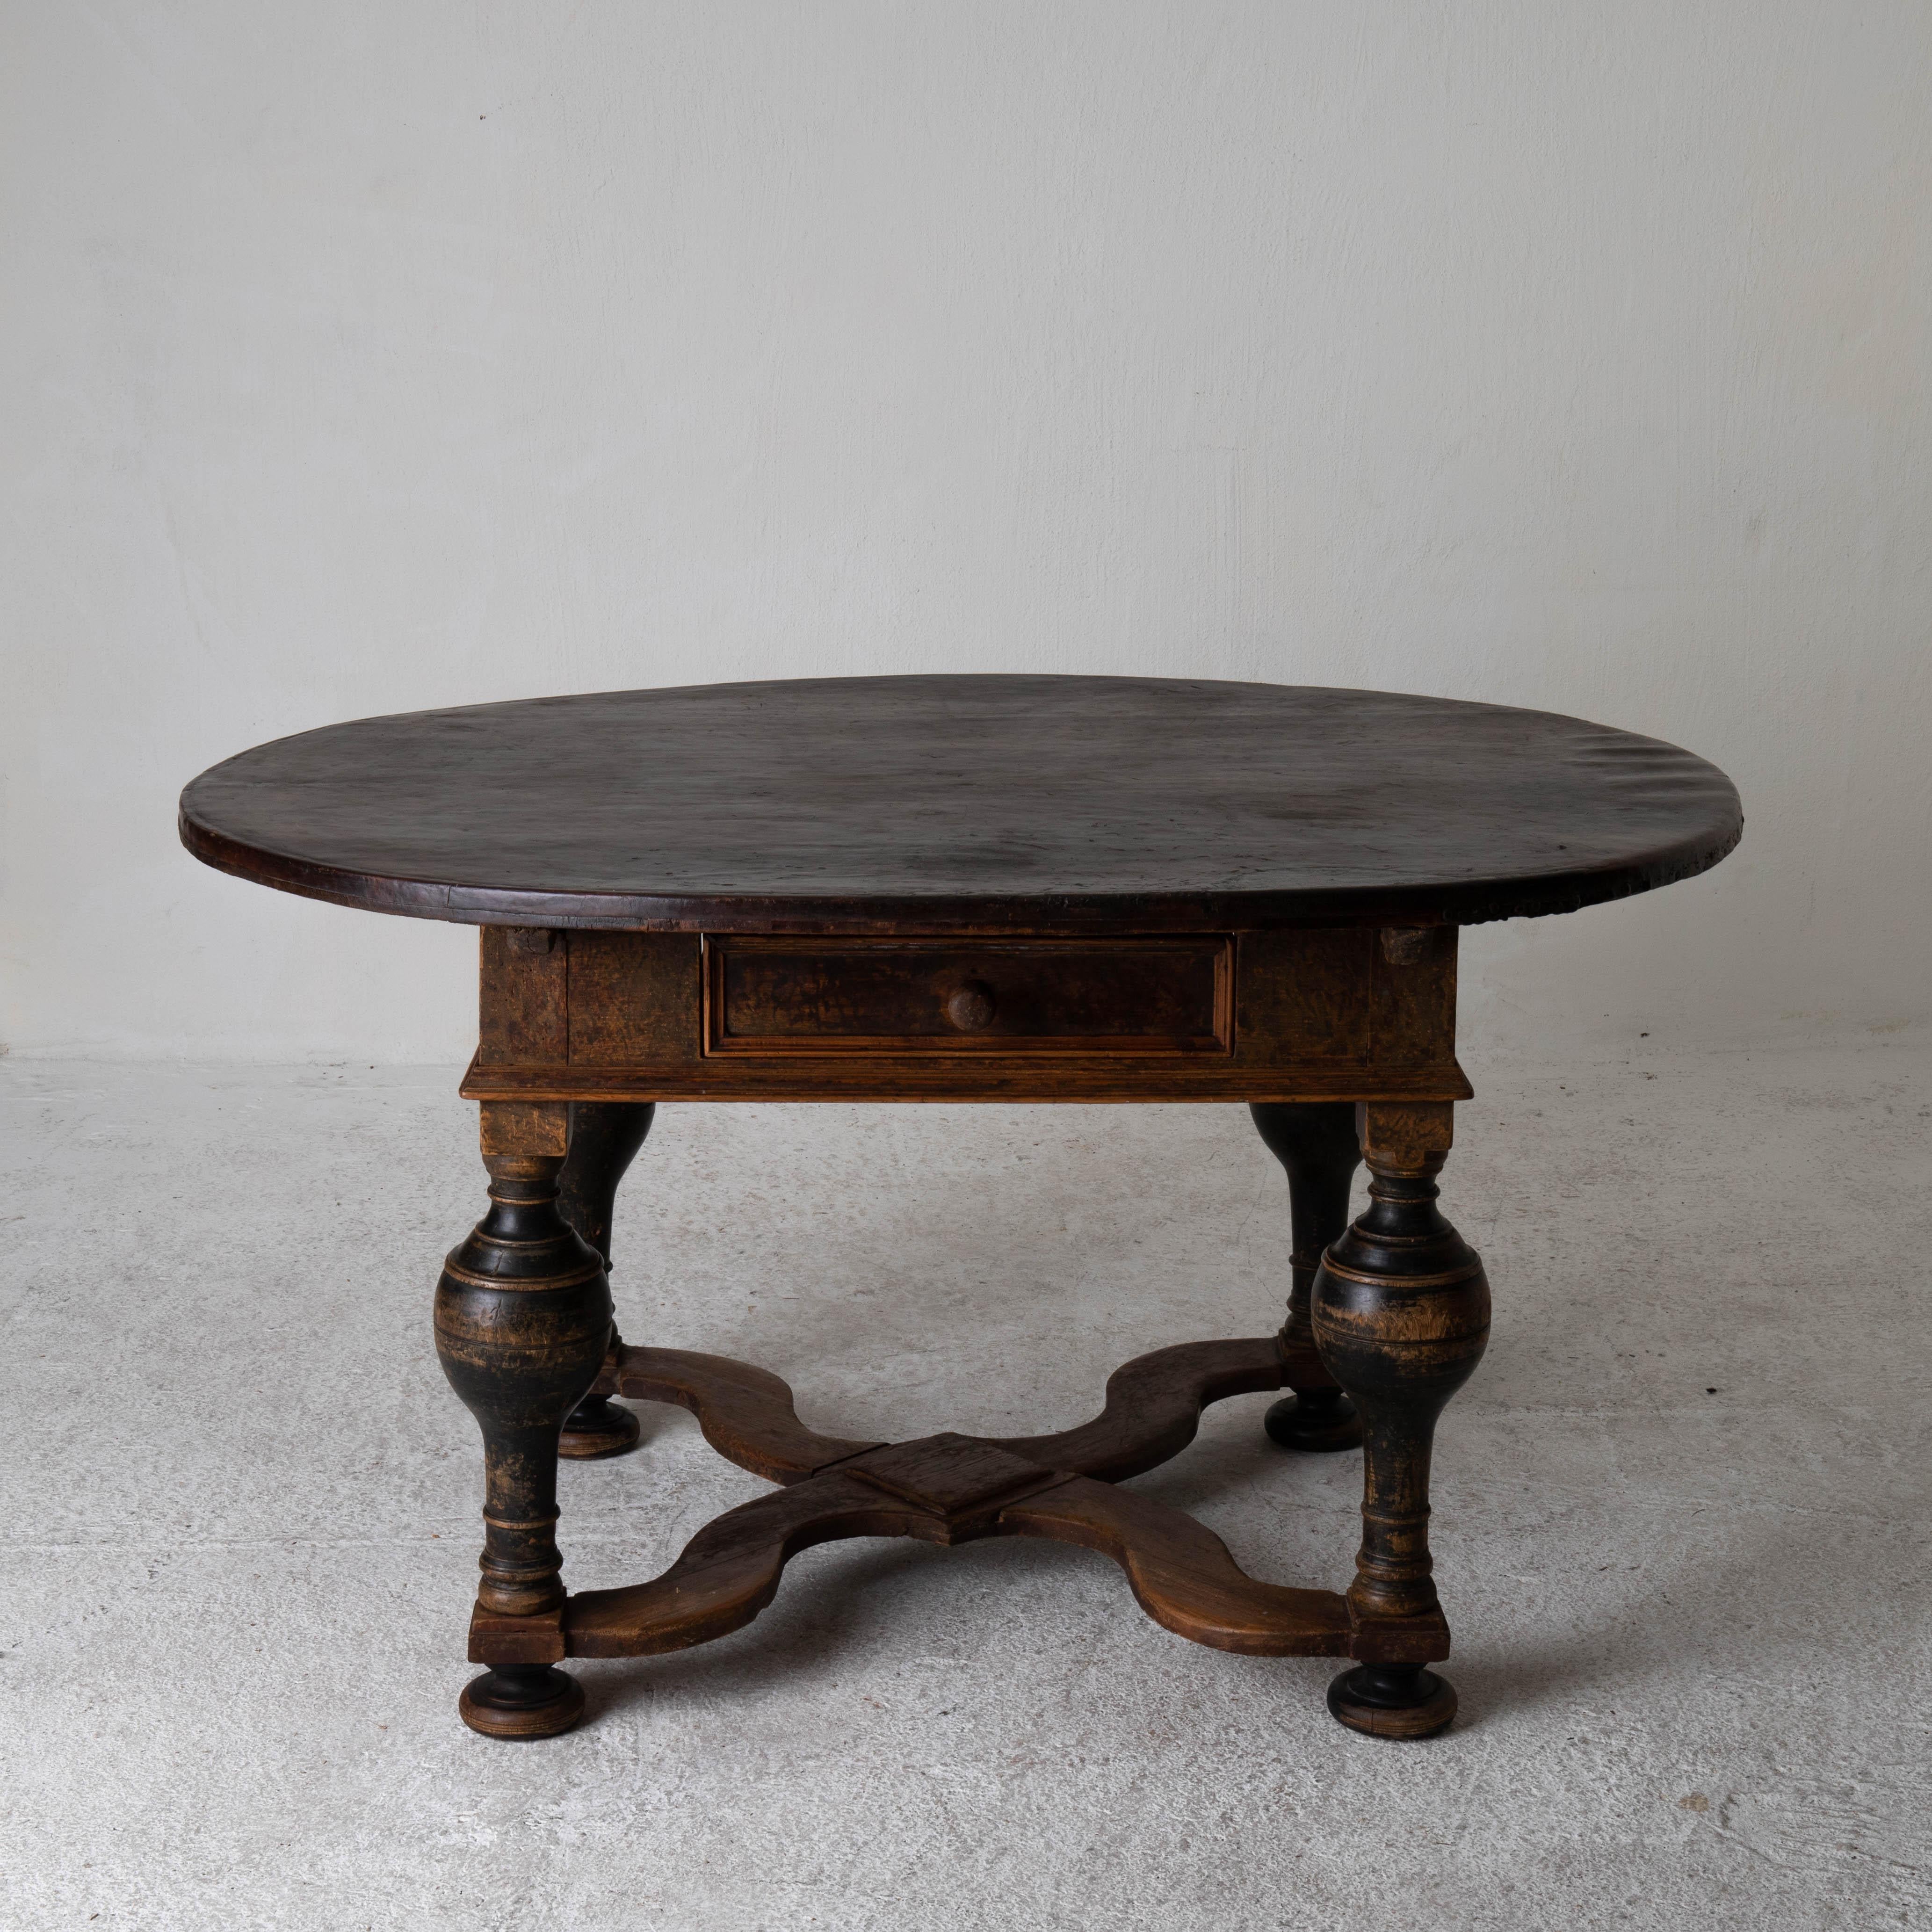 Table rare Swedish Baroque period 1650-1750 leather top Sweden. A table made during the Baroque period 1650-1750 in Sweden. Brass nail heads decorates a part of the edge of the top. Drawer in frieze. Baluster shaped legs that are tied together in a